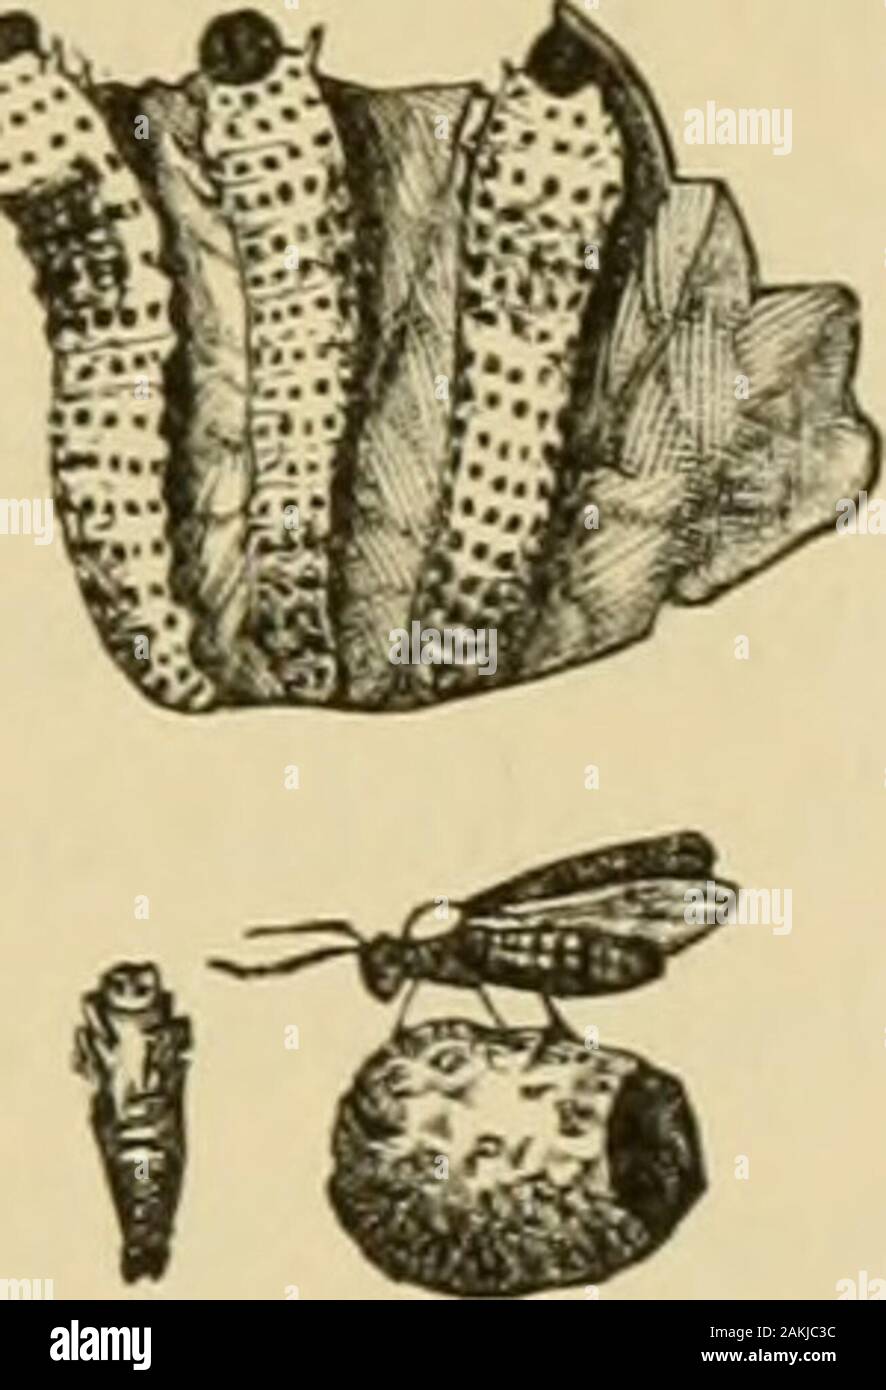 Insects injurious to fruits . eserving their ranks withmuch regularity, as shown in Fig. 296. They begin at oneedge of the leaf and eat the whole of theleaf—including the ribs—to the stalk, and Fig. 296.proceed from leaf to leaf down the branch, ffs^,devouring as they go, until they are fullgrown. When mature, they measure aboutfive-eighths of an inch in length, are somewhatslender and tapering behind, and thickenedbefore the middle. They are of a pale-yellowcolor, darker or greenish on the back, withtwo transverse rows of minute black points across each ring,the head and tip of the last segme Stock Photo